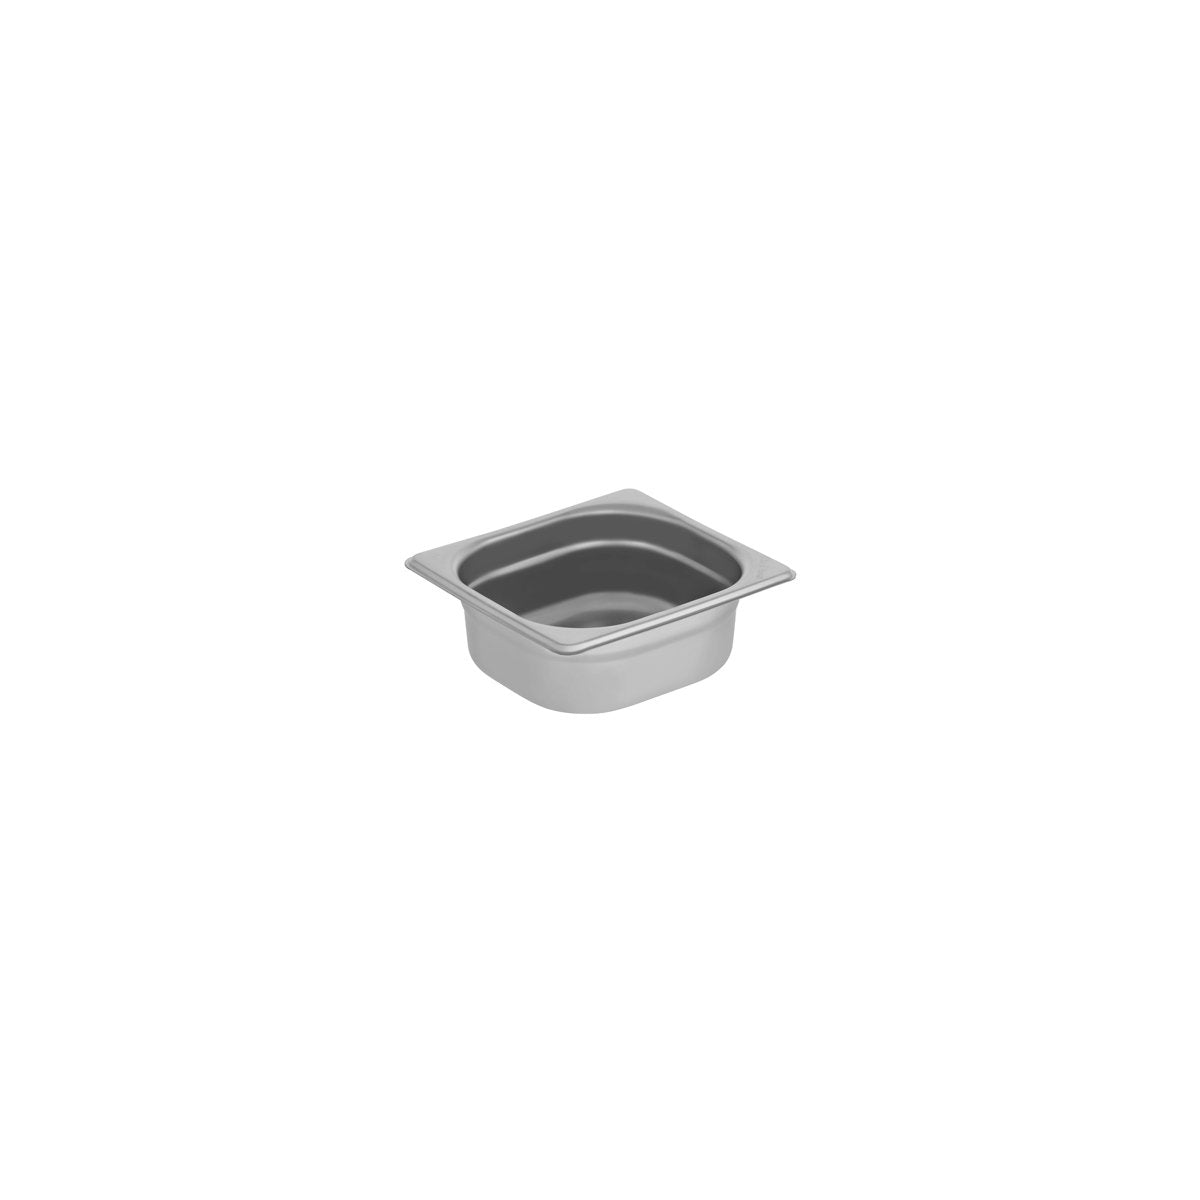 GN-16065 Chef Inox Gastronorm Pan 1/6 Size 65mm Tomkin Australia Hospitality Supplies